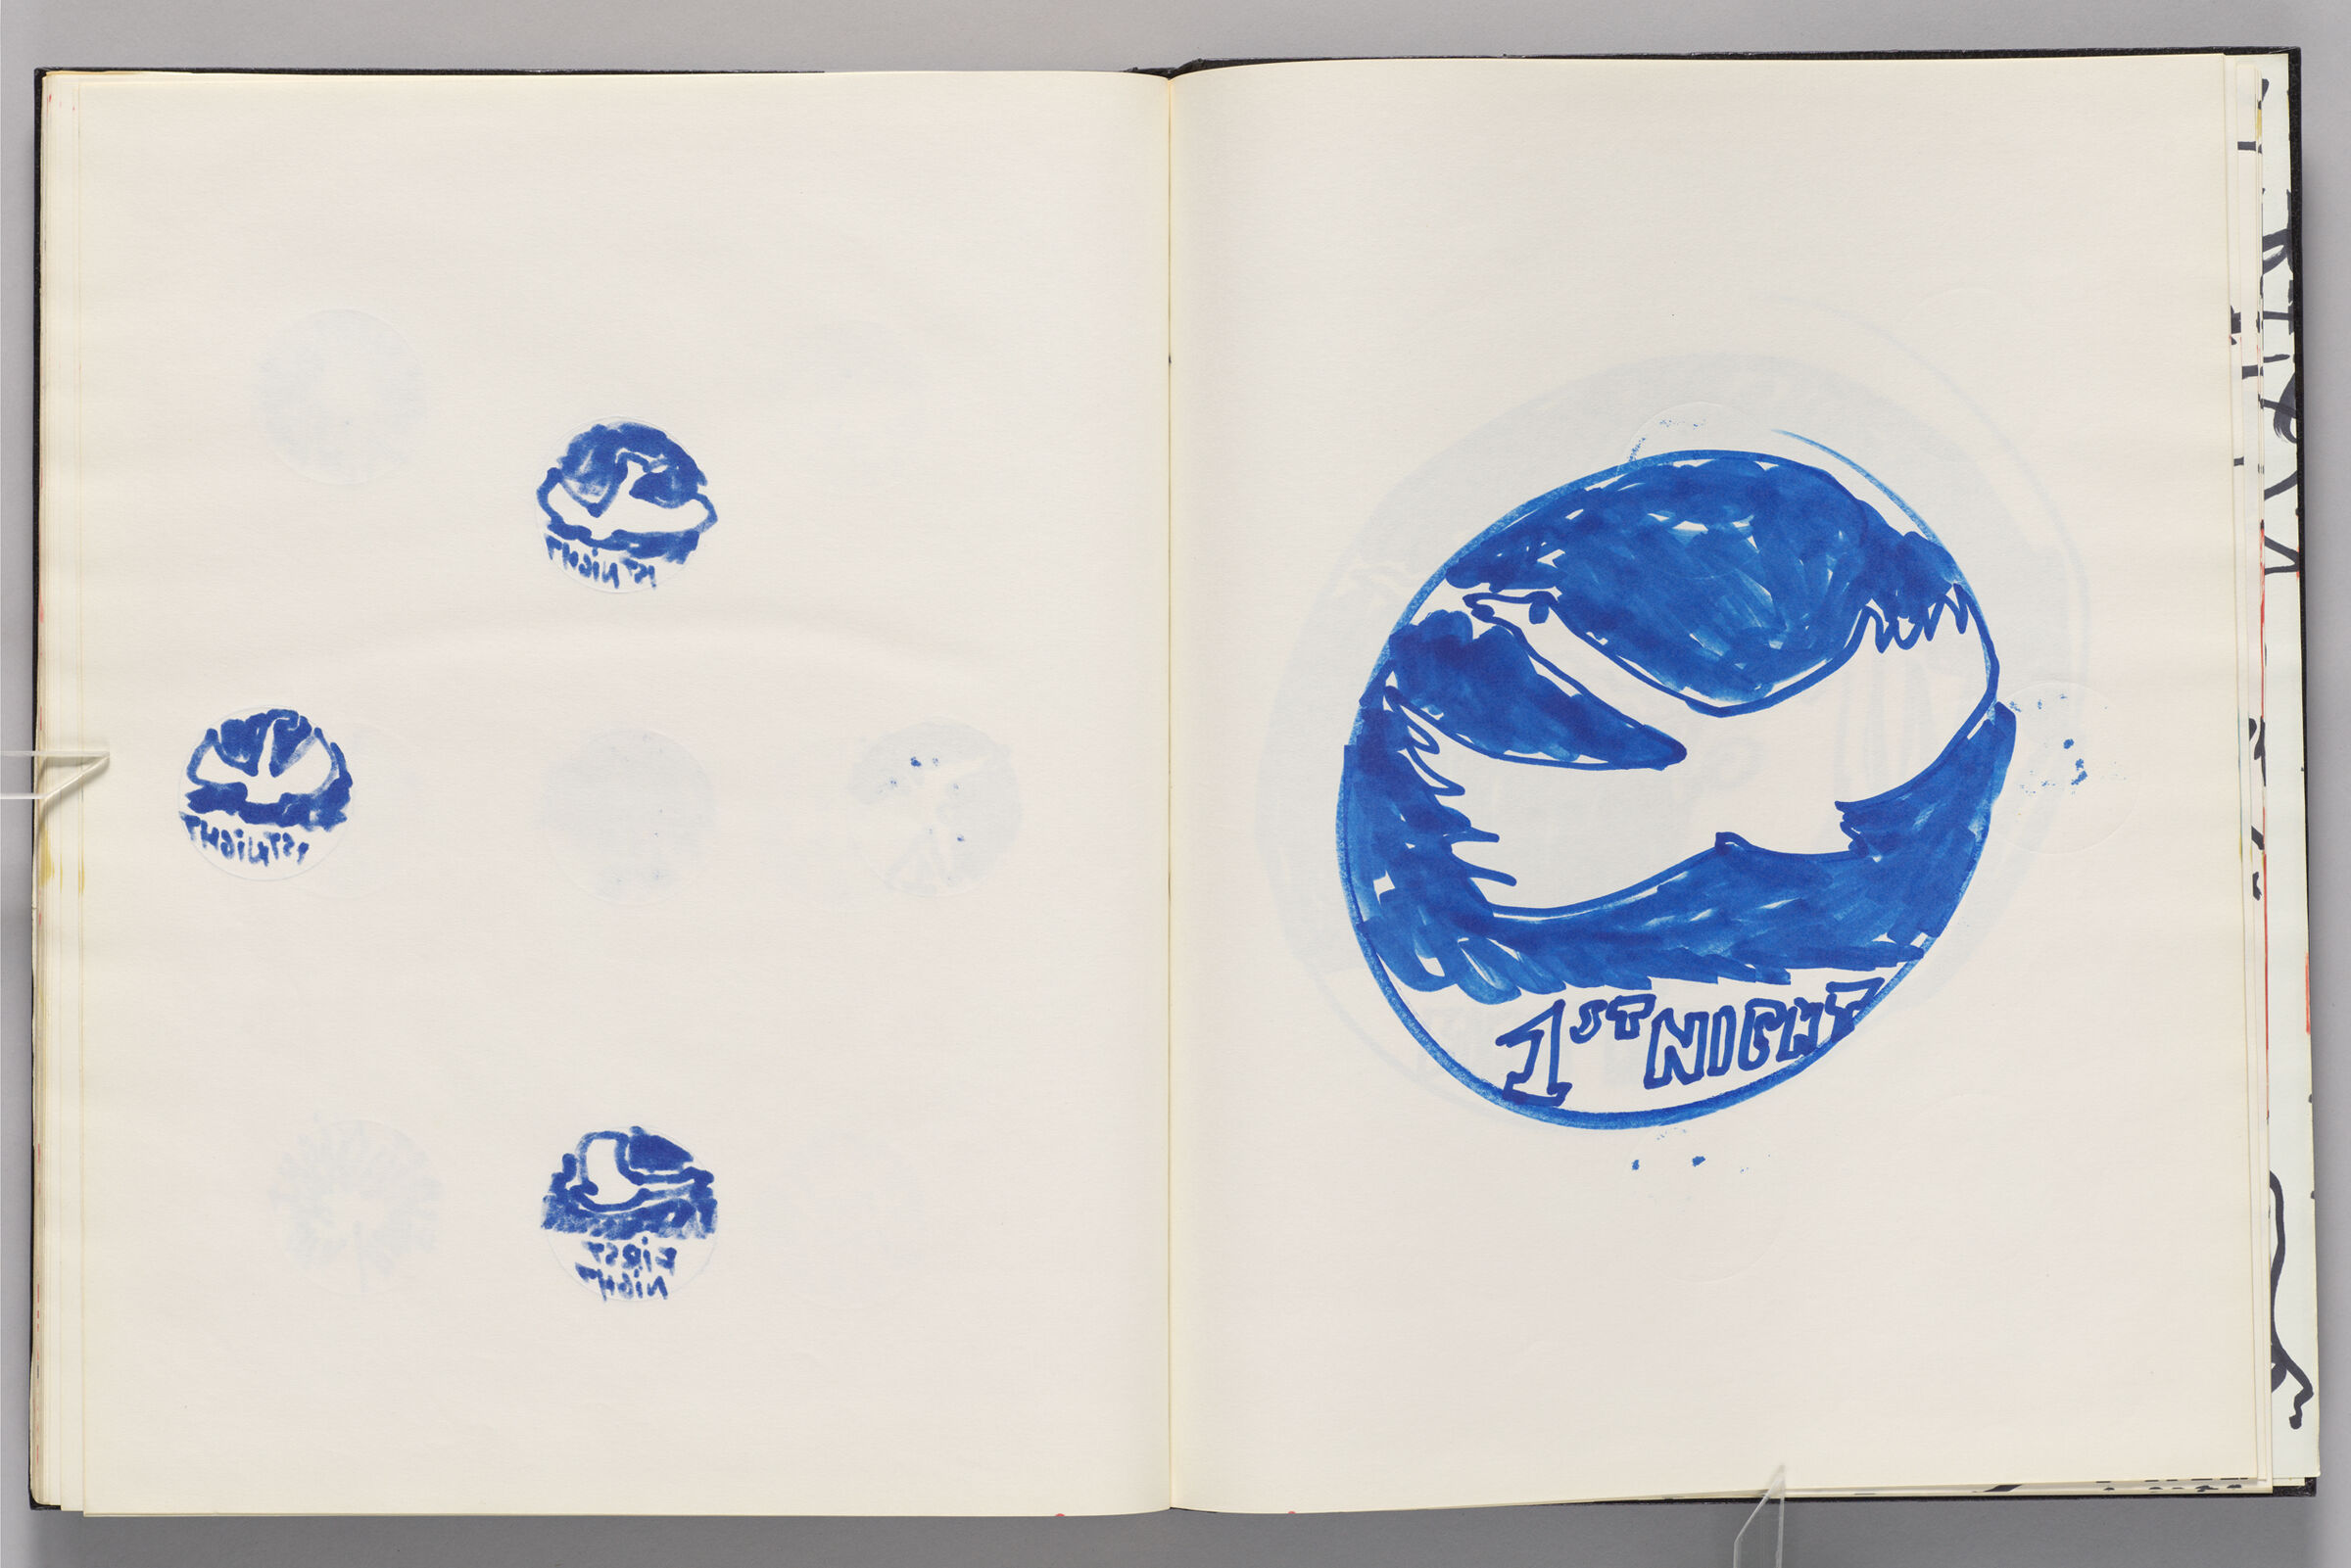 Untitled (Bleed-Through Of Previous Page, Left Page); Untitled (Design For First Night Button, Right Page)